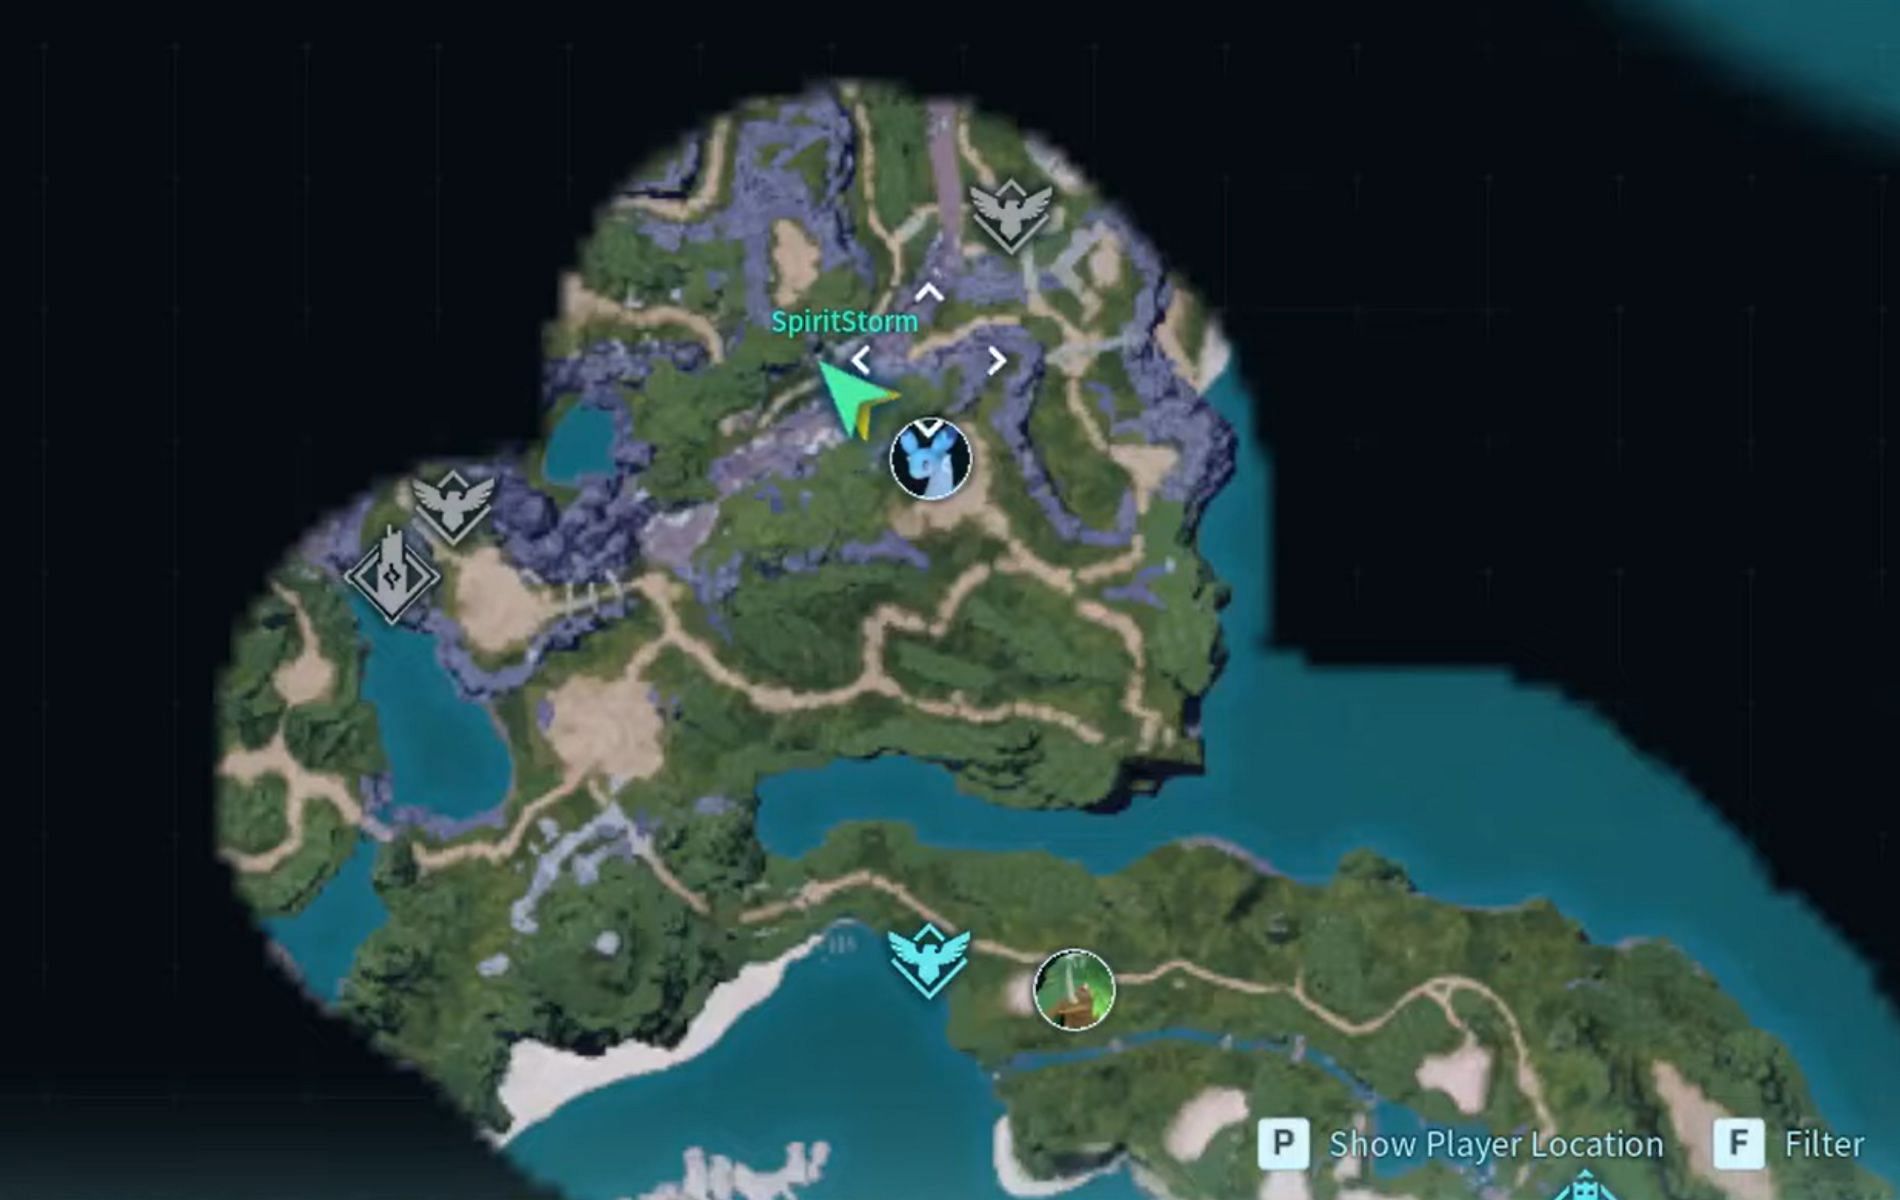 Location of Chillet in Palword (Image via YouTube/Video Game News)